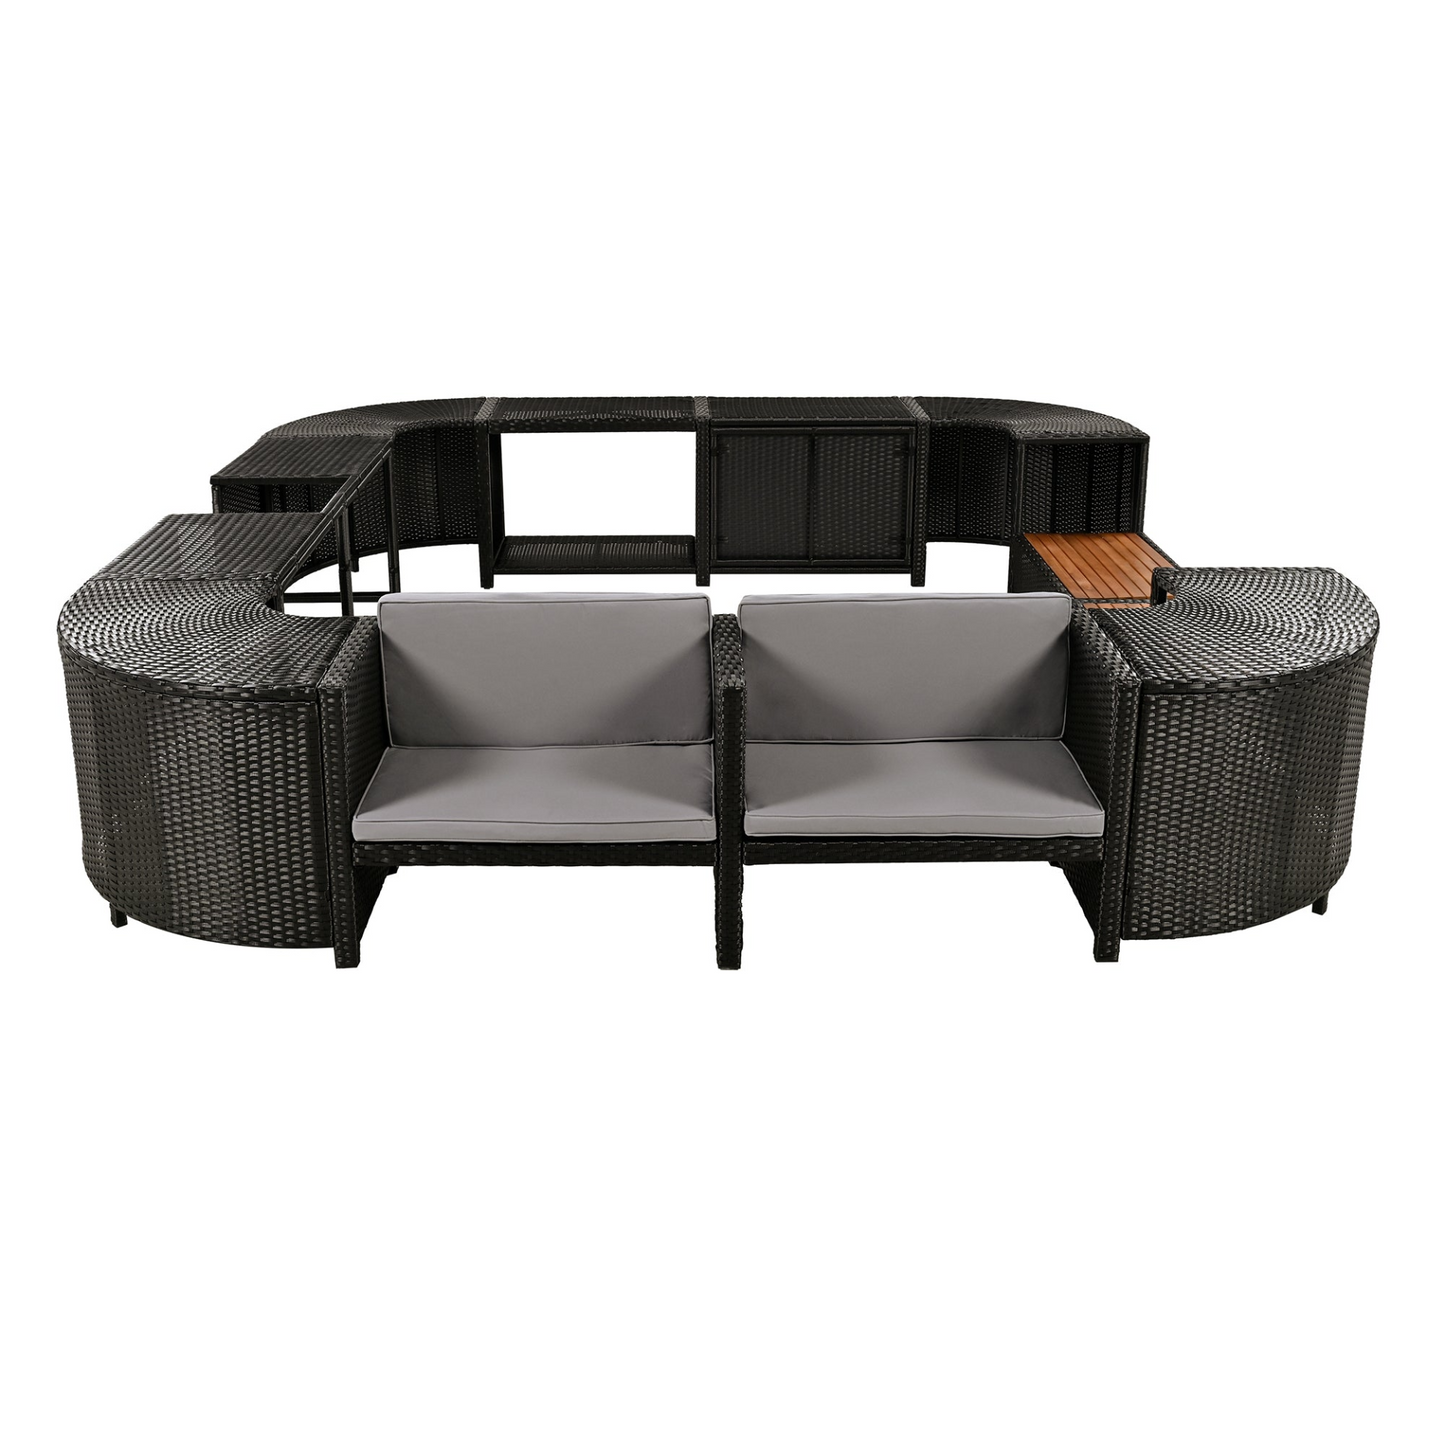 Spa Surround Spa Frame Quadrilateral Outdoor Rattan Sectional Sofa Set with Mini Sofa, Wooden Seats and Storage Spaces, Grey, Goodies N Stuff